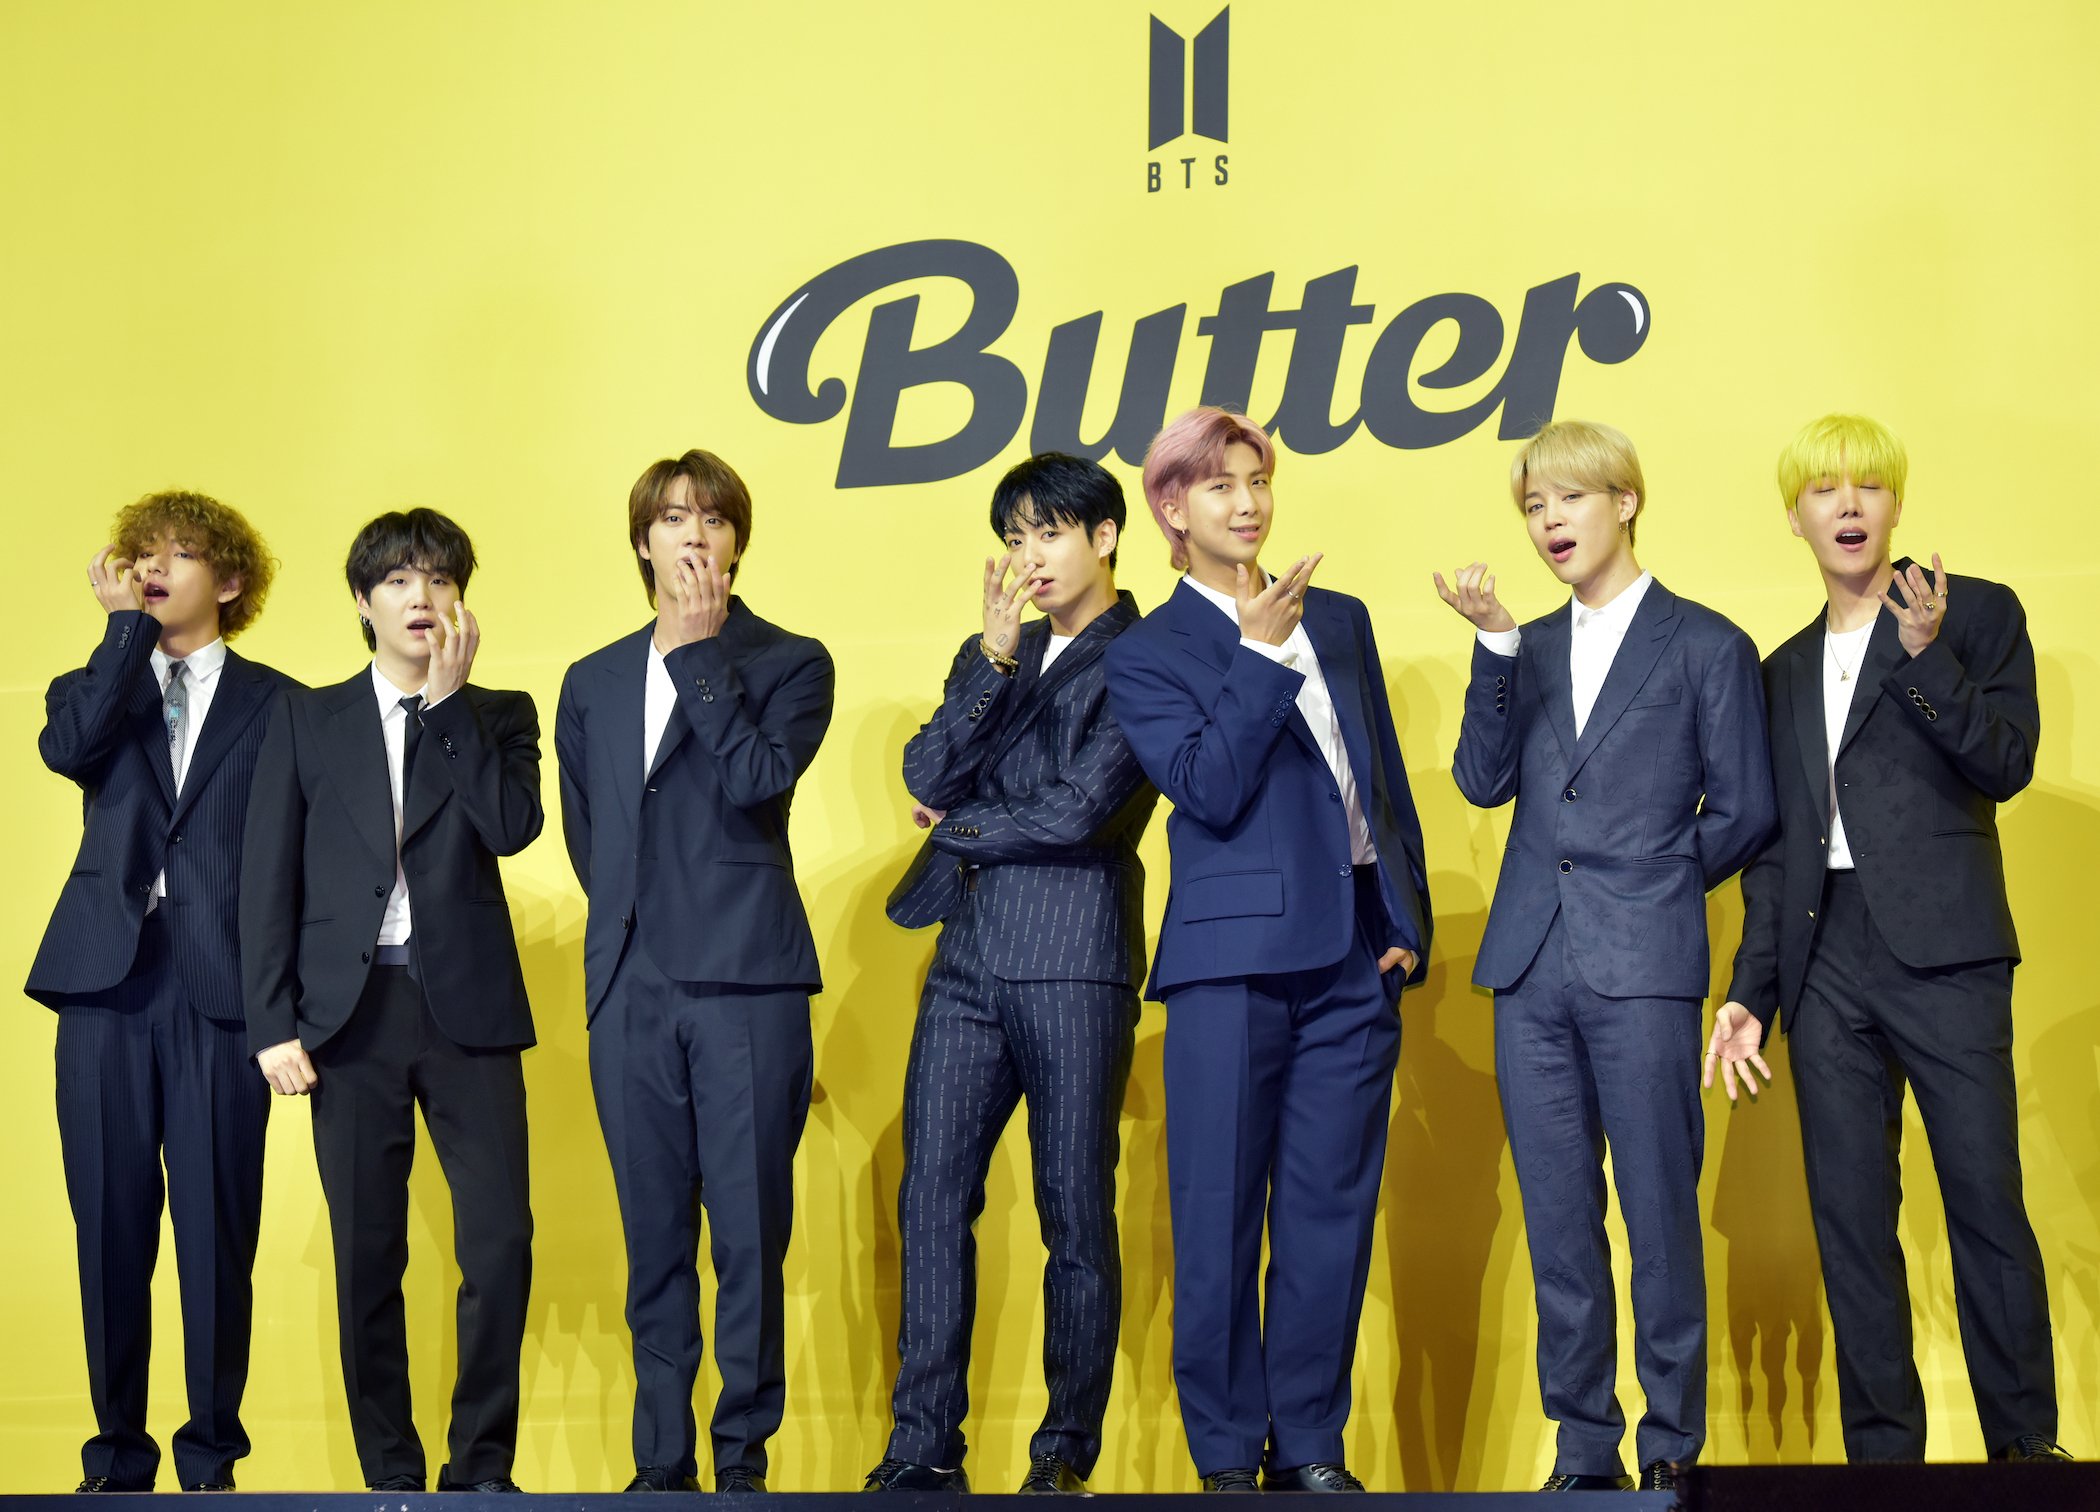 BTS attends a press conference for BTS's new digital single 'Butter' The Chosunilbo